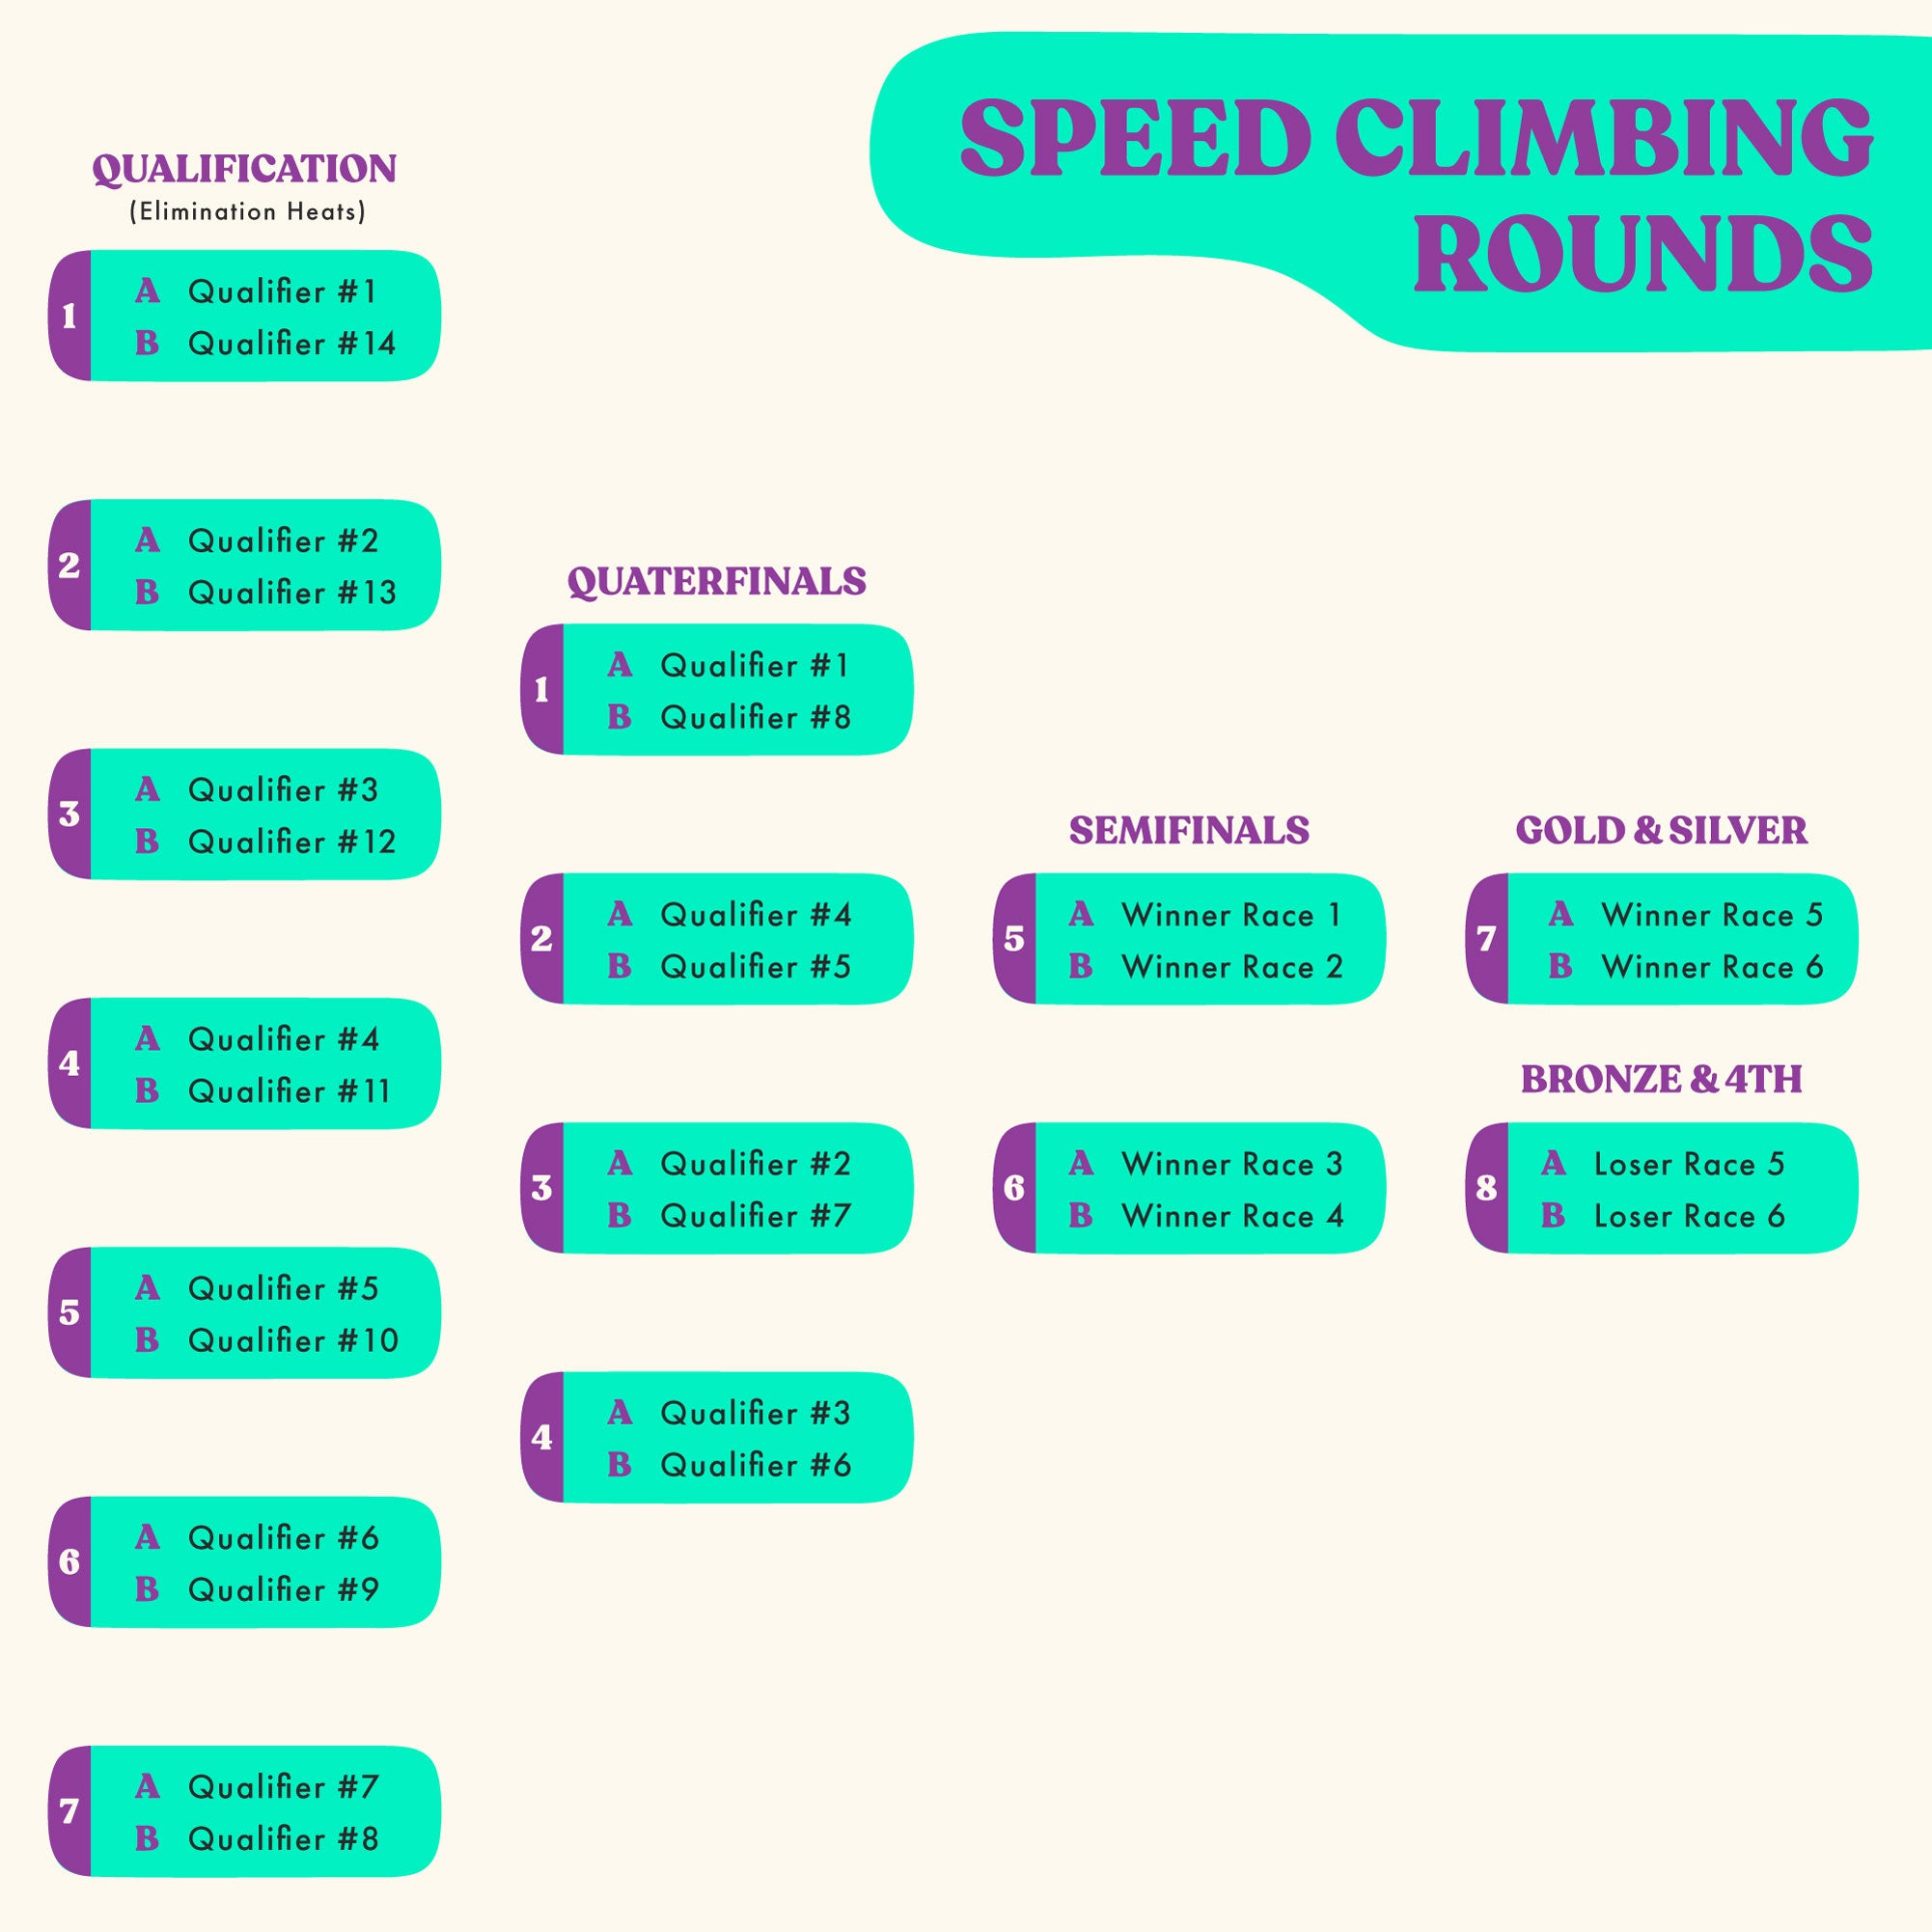 A diagram explaining the olympic speed climbing qualifiers, quaterfinals, semifinals and finals.